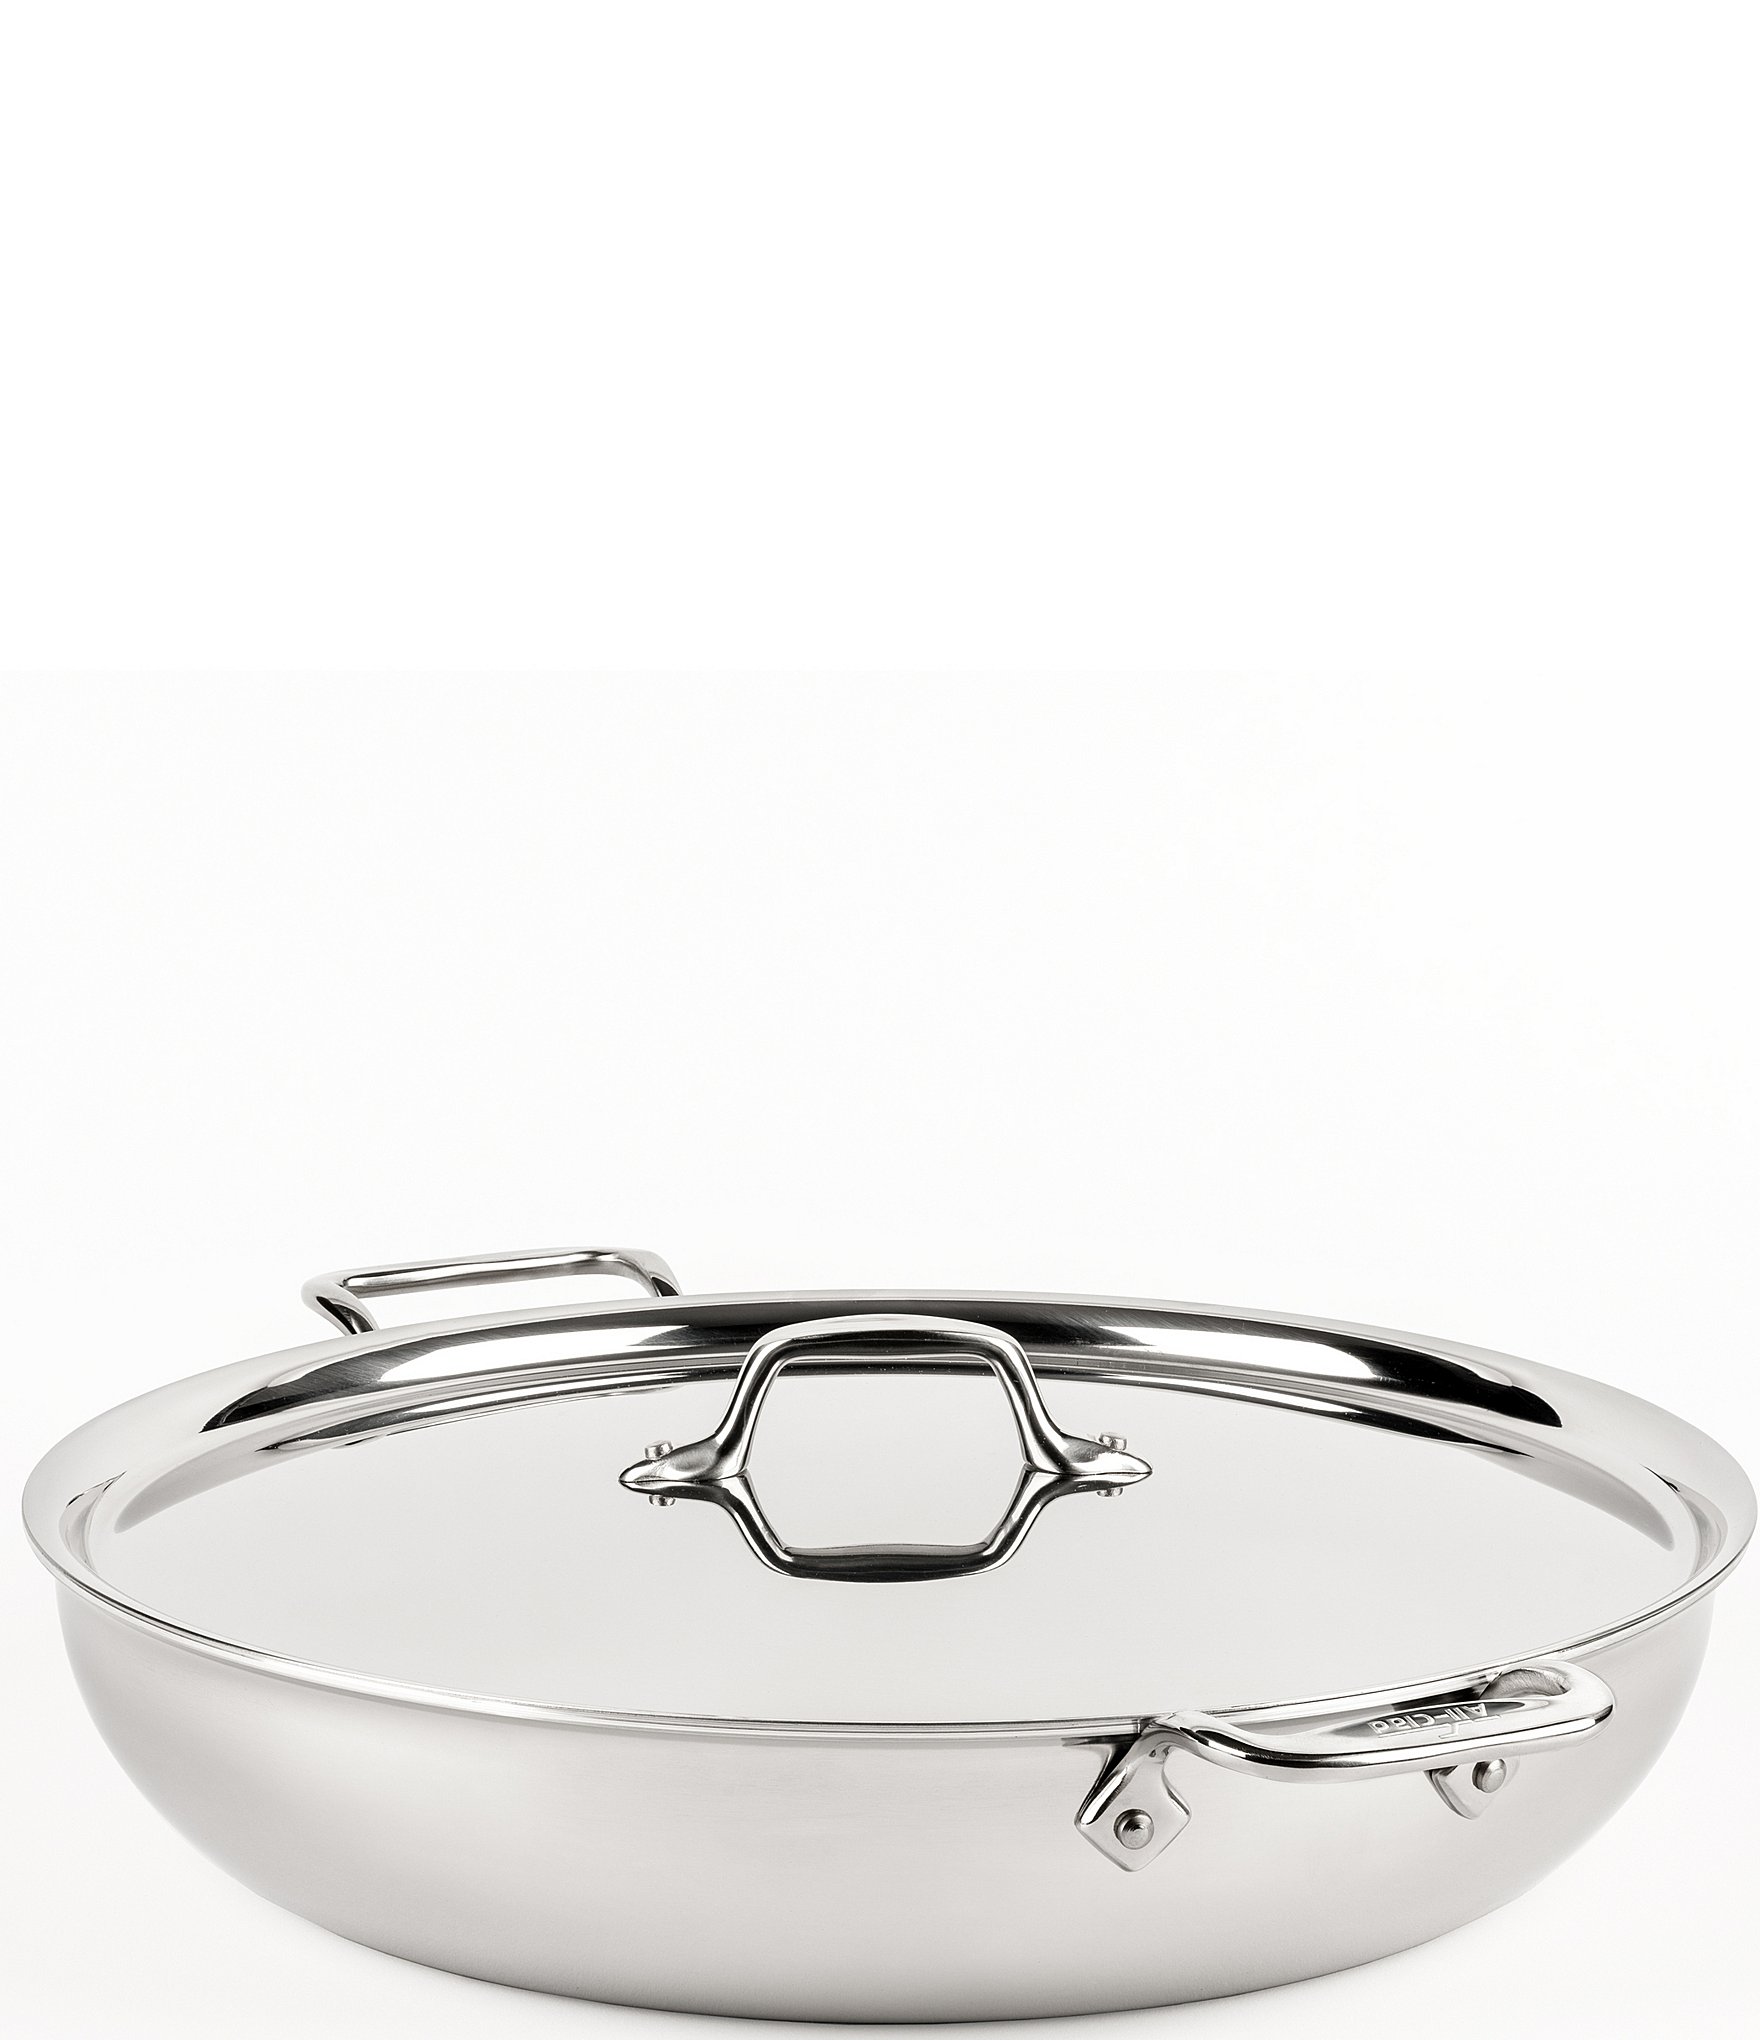 D3 Stainless Everyday 3-ply Bonded Cookware, Rondeau Pan with lid, 8 quart